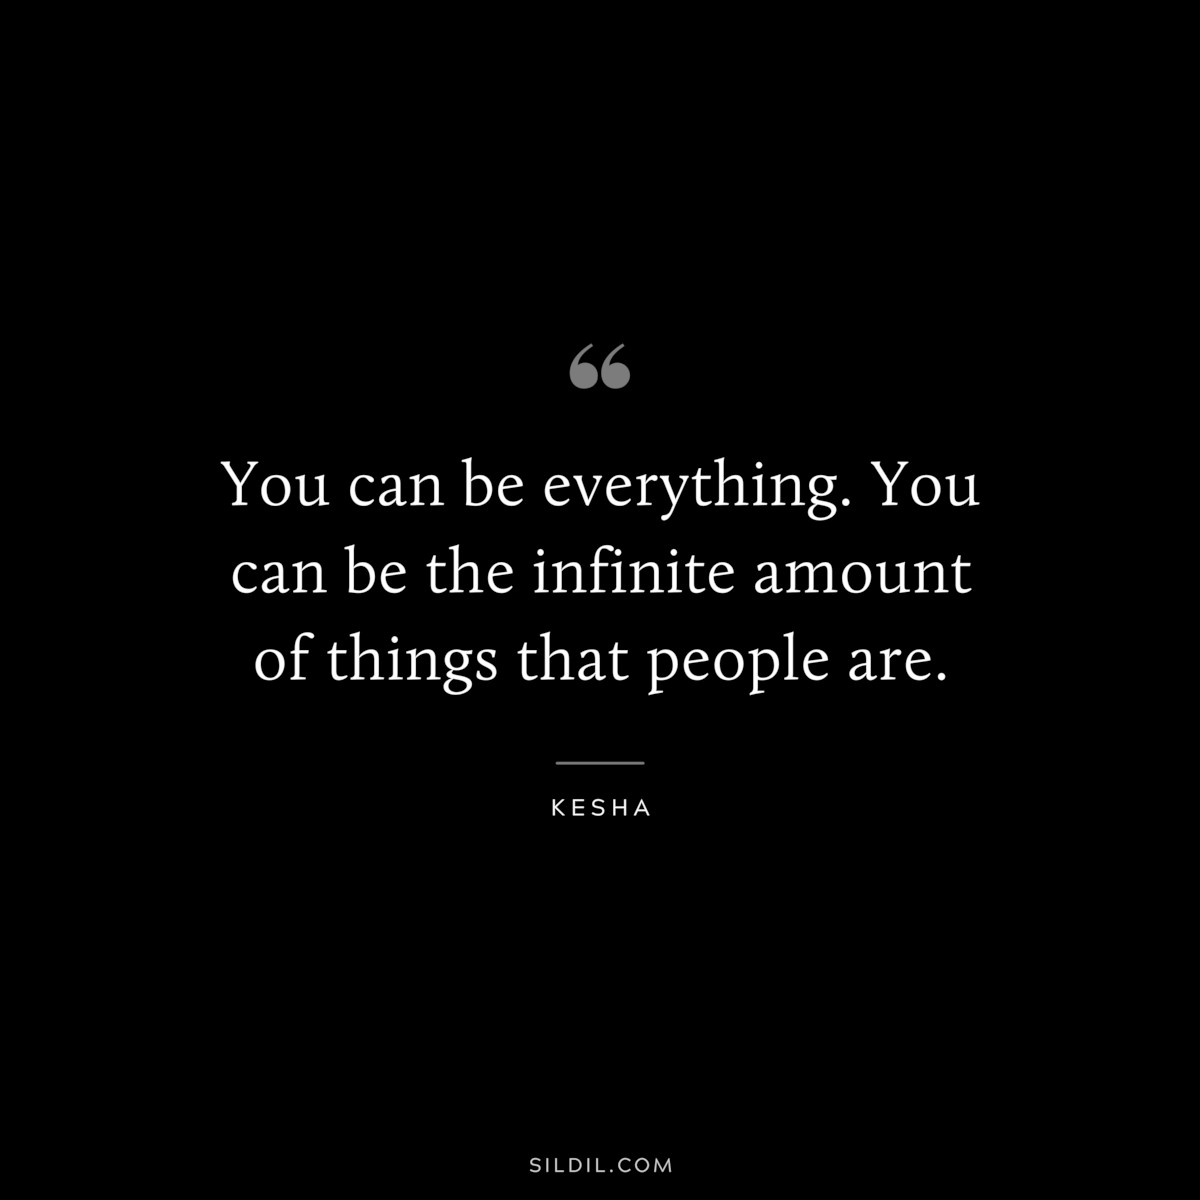 You can be everything. You can be the infinite amount of things that people are. ― Kesha